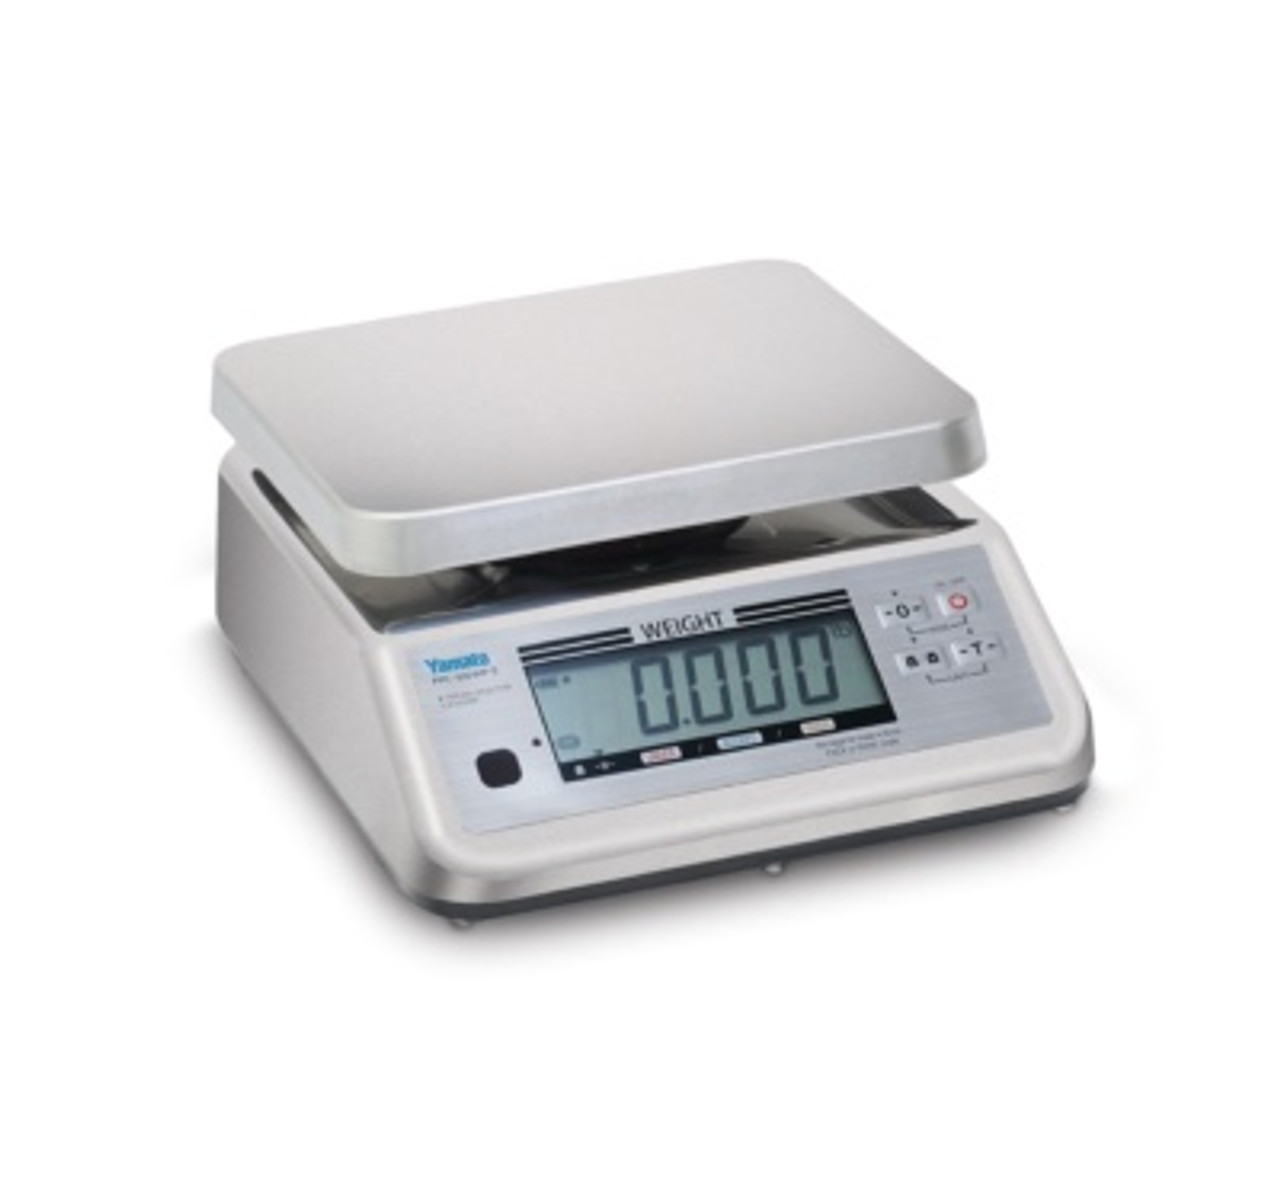 Yamato PPC-300WP - Portion Control Scale "Washdown" - All Models - 